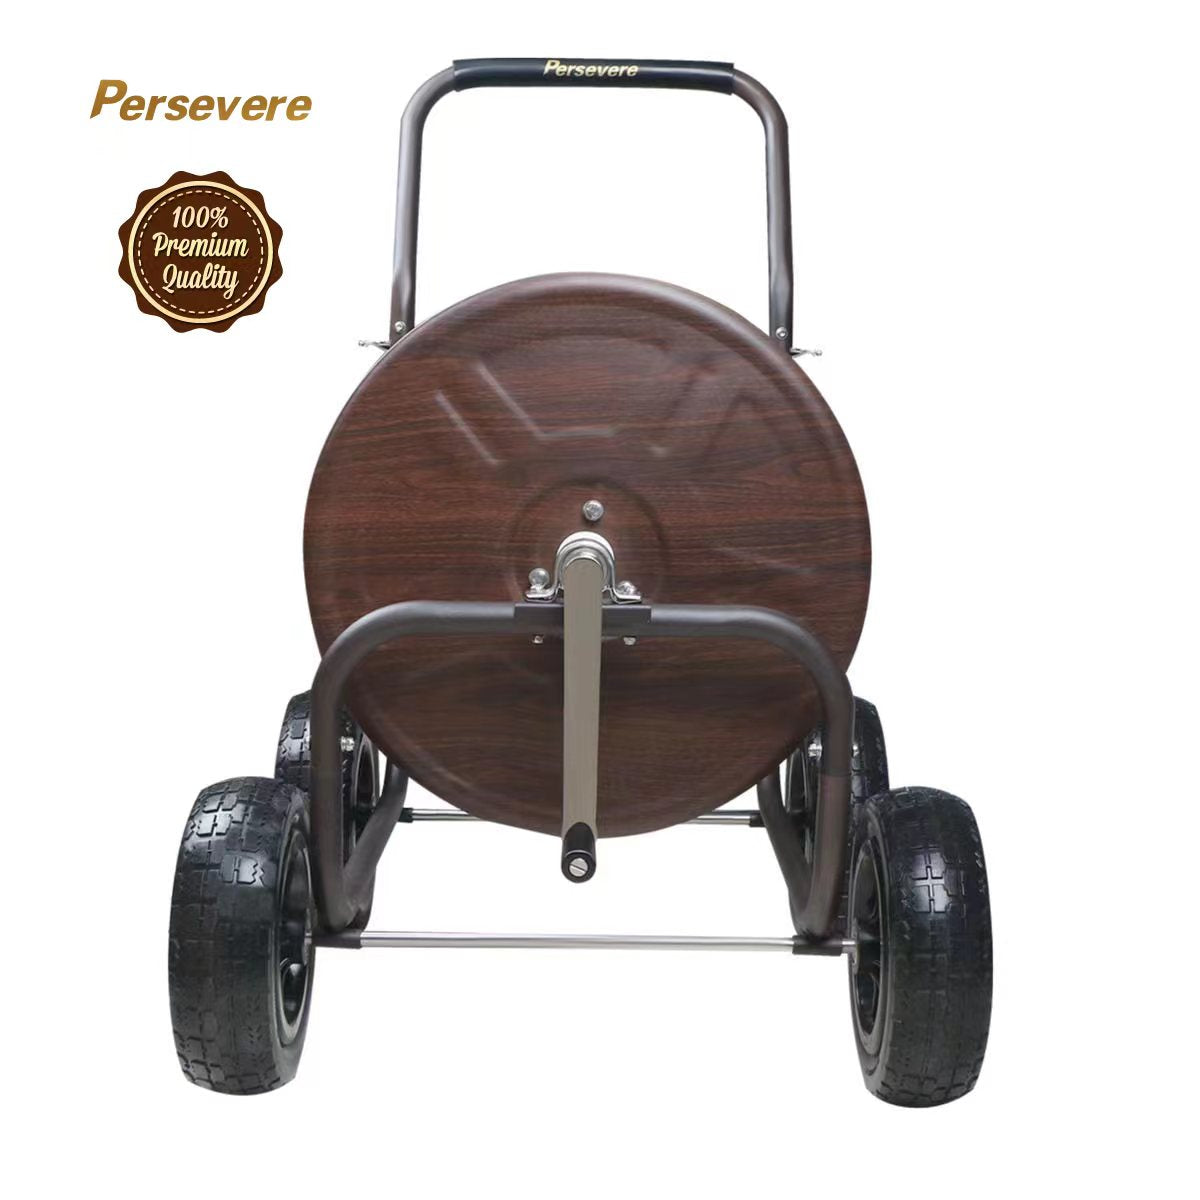 Persevere Stainless Steel Garden Hose Reel Cart Heavy Duty Portable Hose  Holder with Basket 4 Solid Wheels Water Hose Storage Cart for Watering